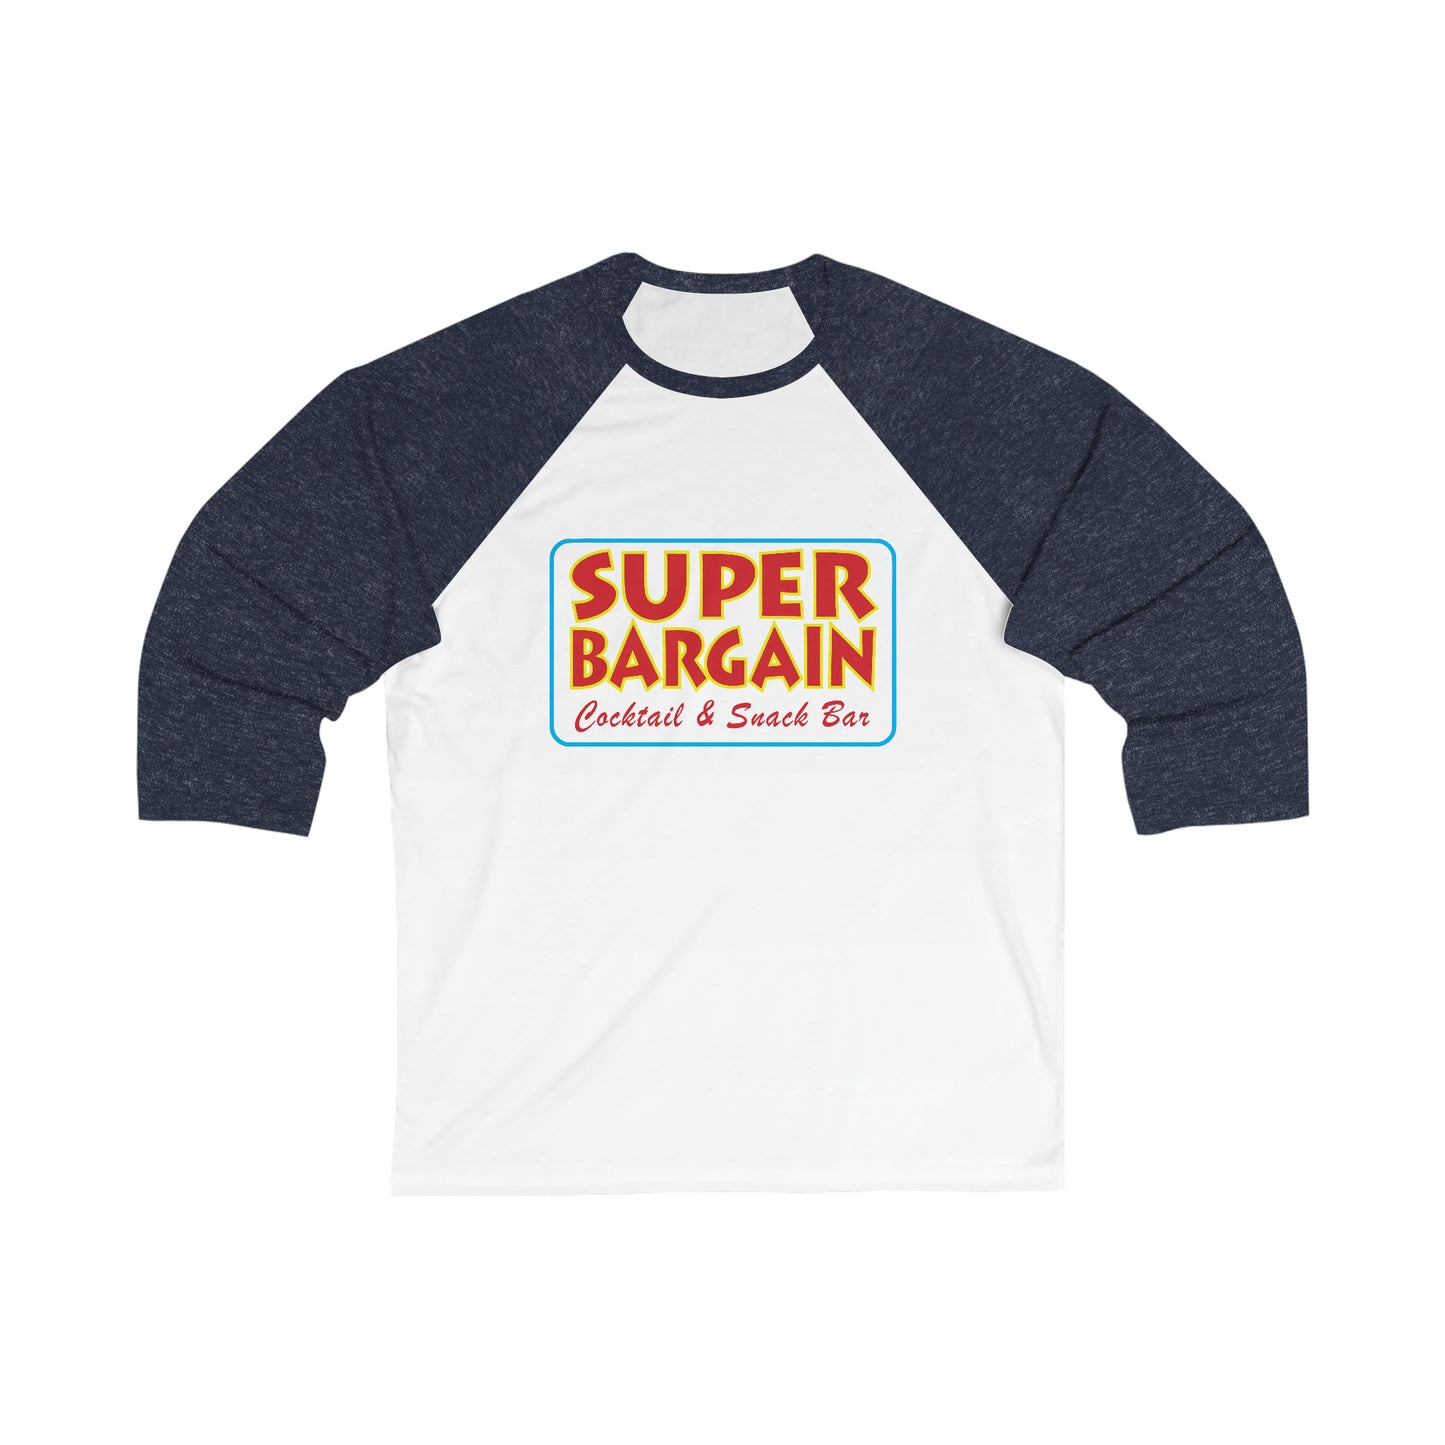 A Unisex 3/4 Sleeve Logo Baseball Tee with dark blue sleeves and a white body featuring the colorful text "Cabbagetown Super Bargain Cocktail & Snack Bar" on the chest from Printify.